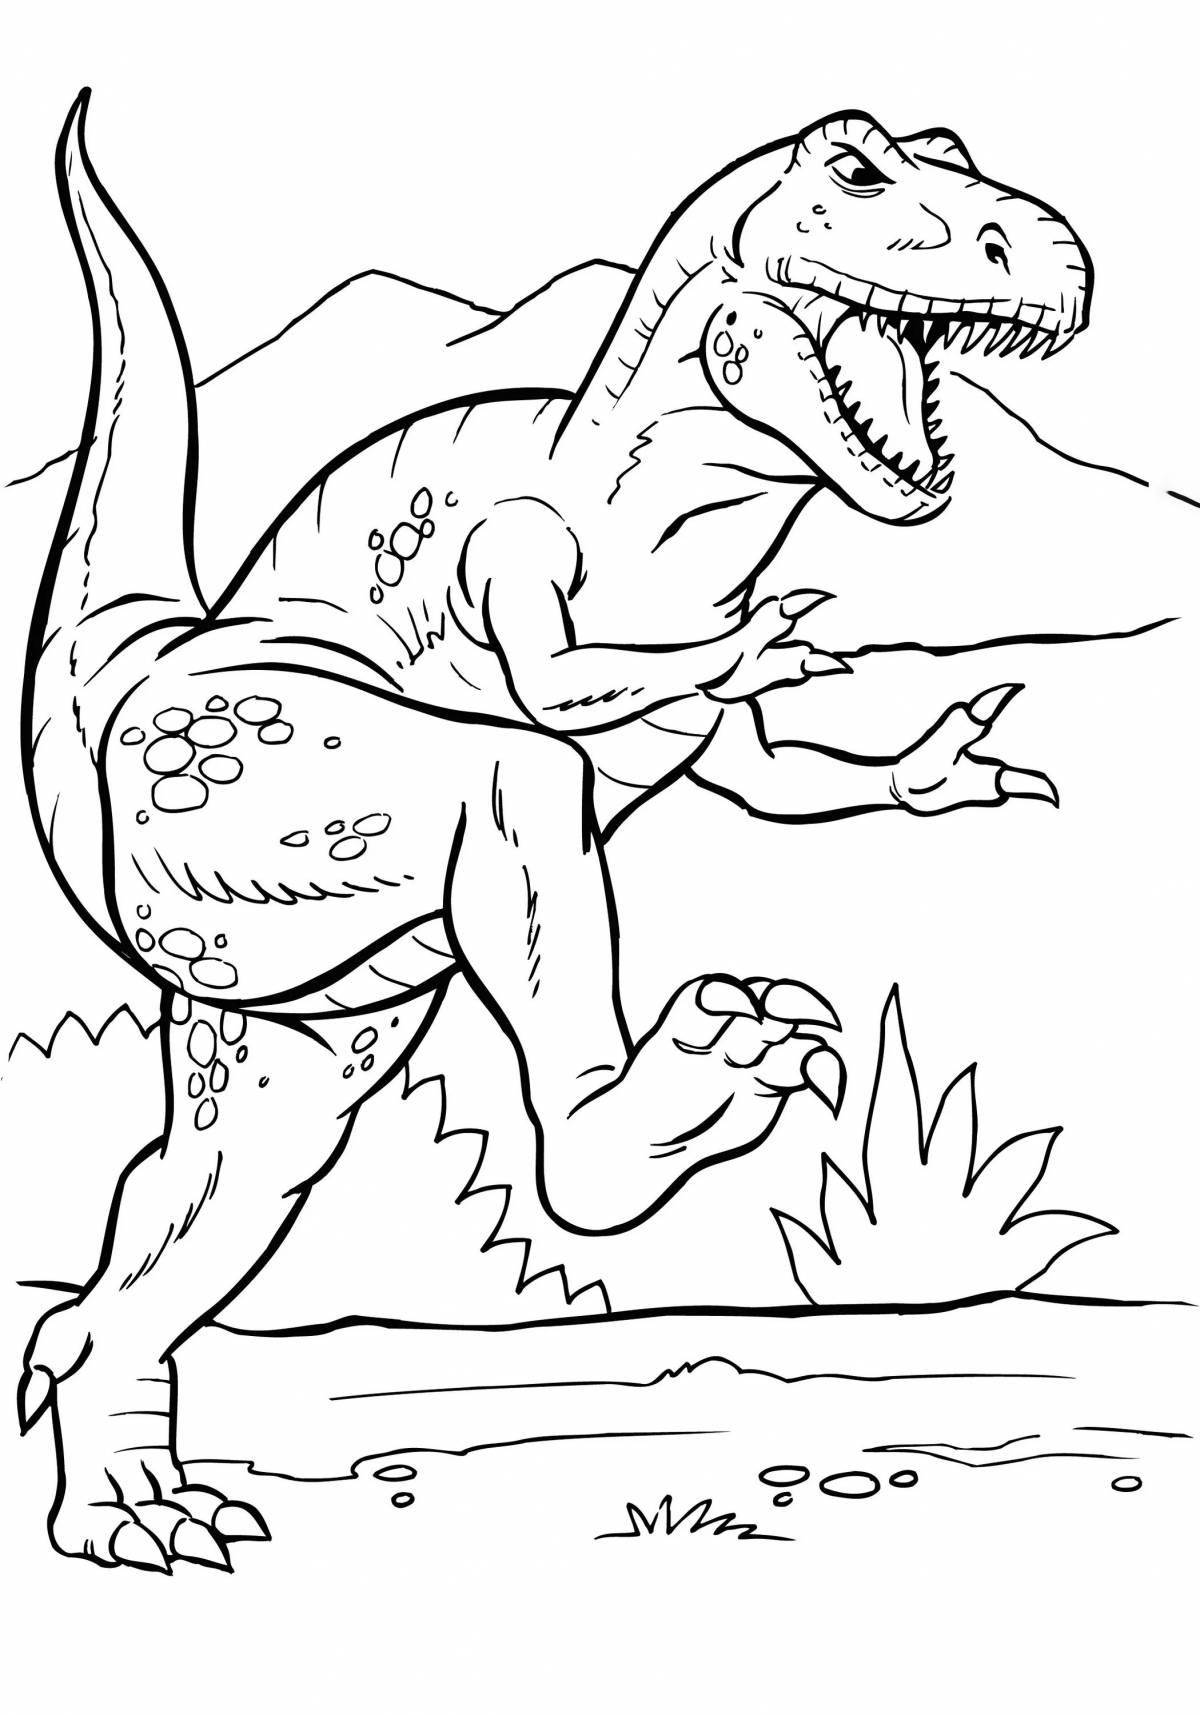 Fabulous rex dinosaur coloring page for kids